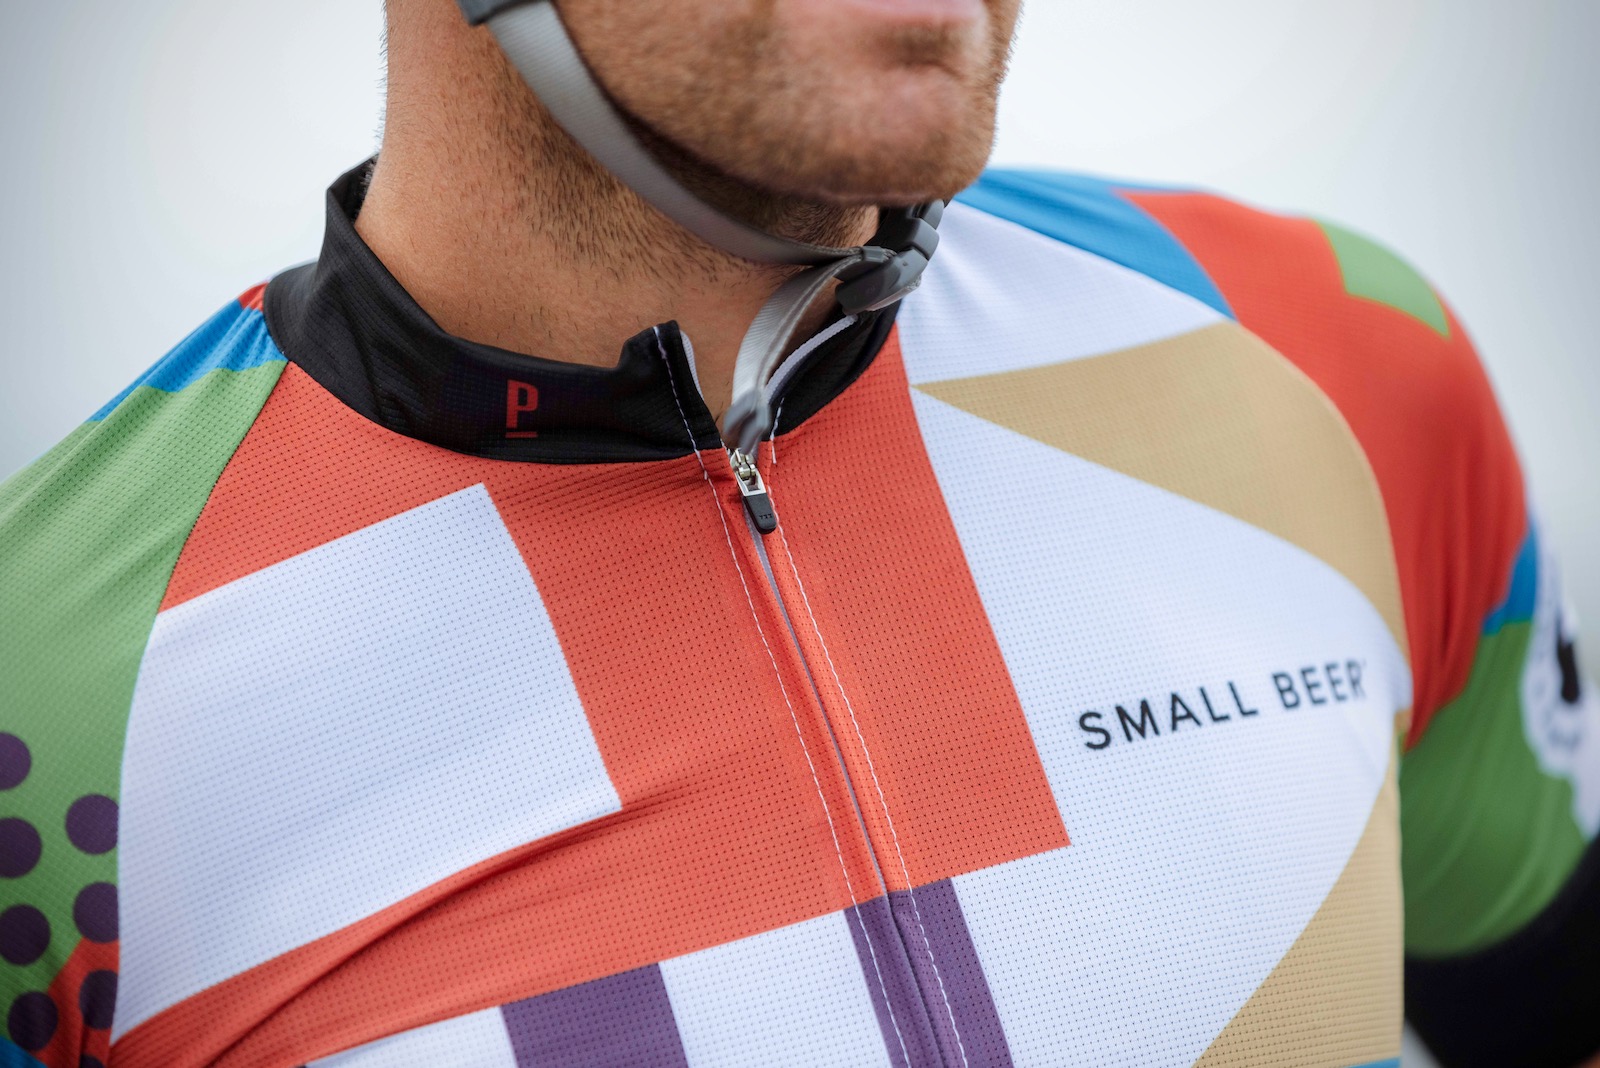 Review – Small Beer x Paria Summer Cycling Jersey